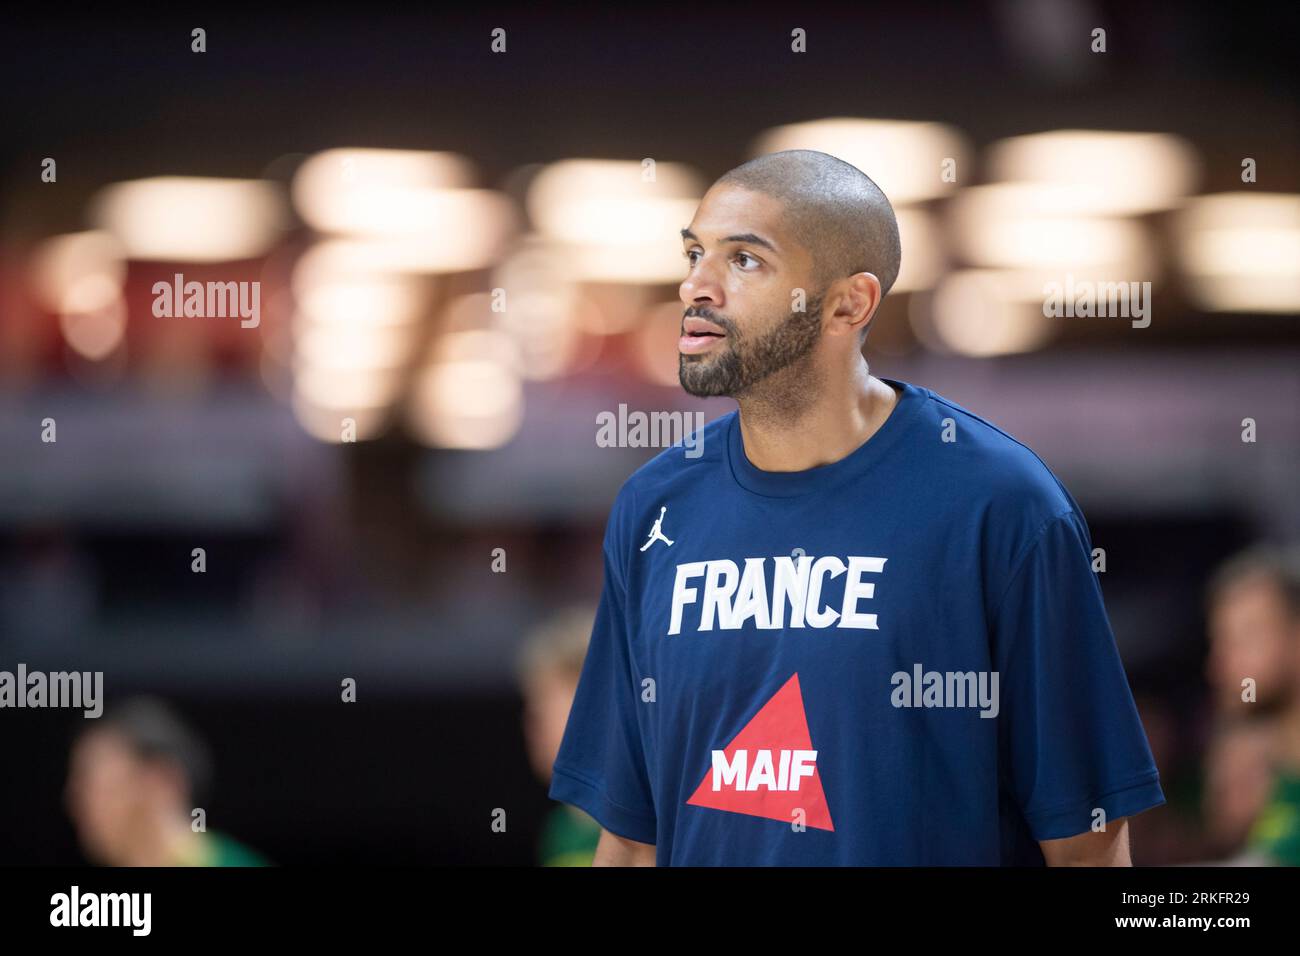 VILNIUS, LITHUANIA - august 11th 2023: FIBA World Cup 2023 tune-up game. Lithuania - France. Basketball player Nicolas Batum in action Stock Photo